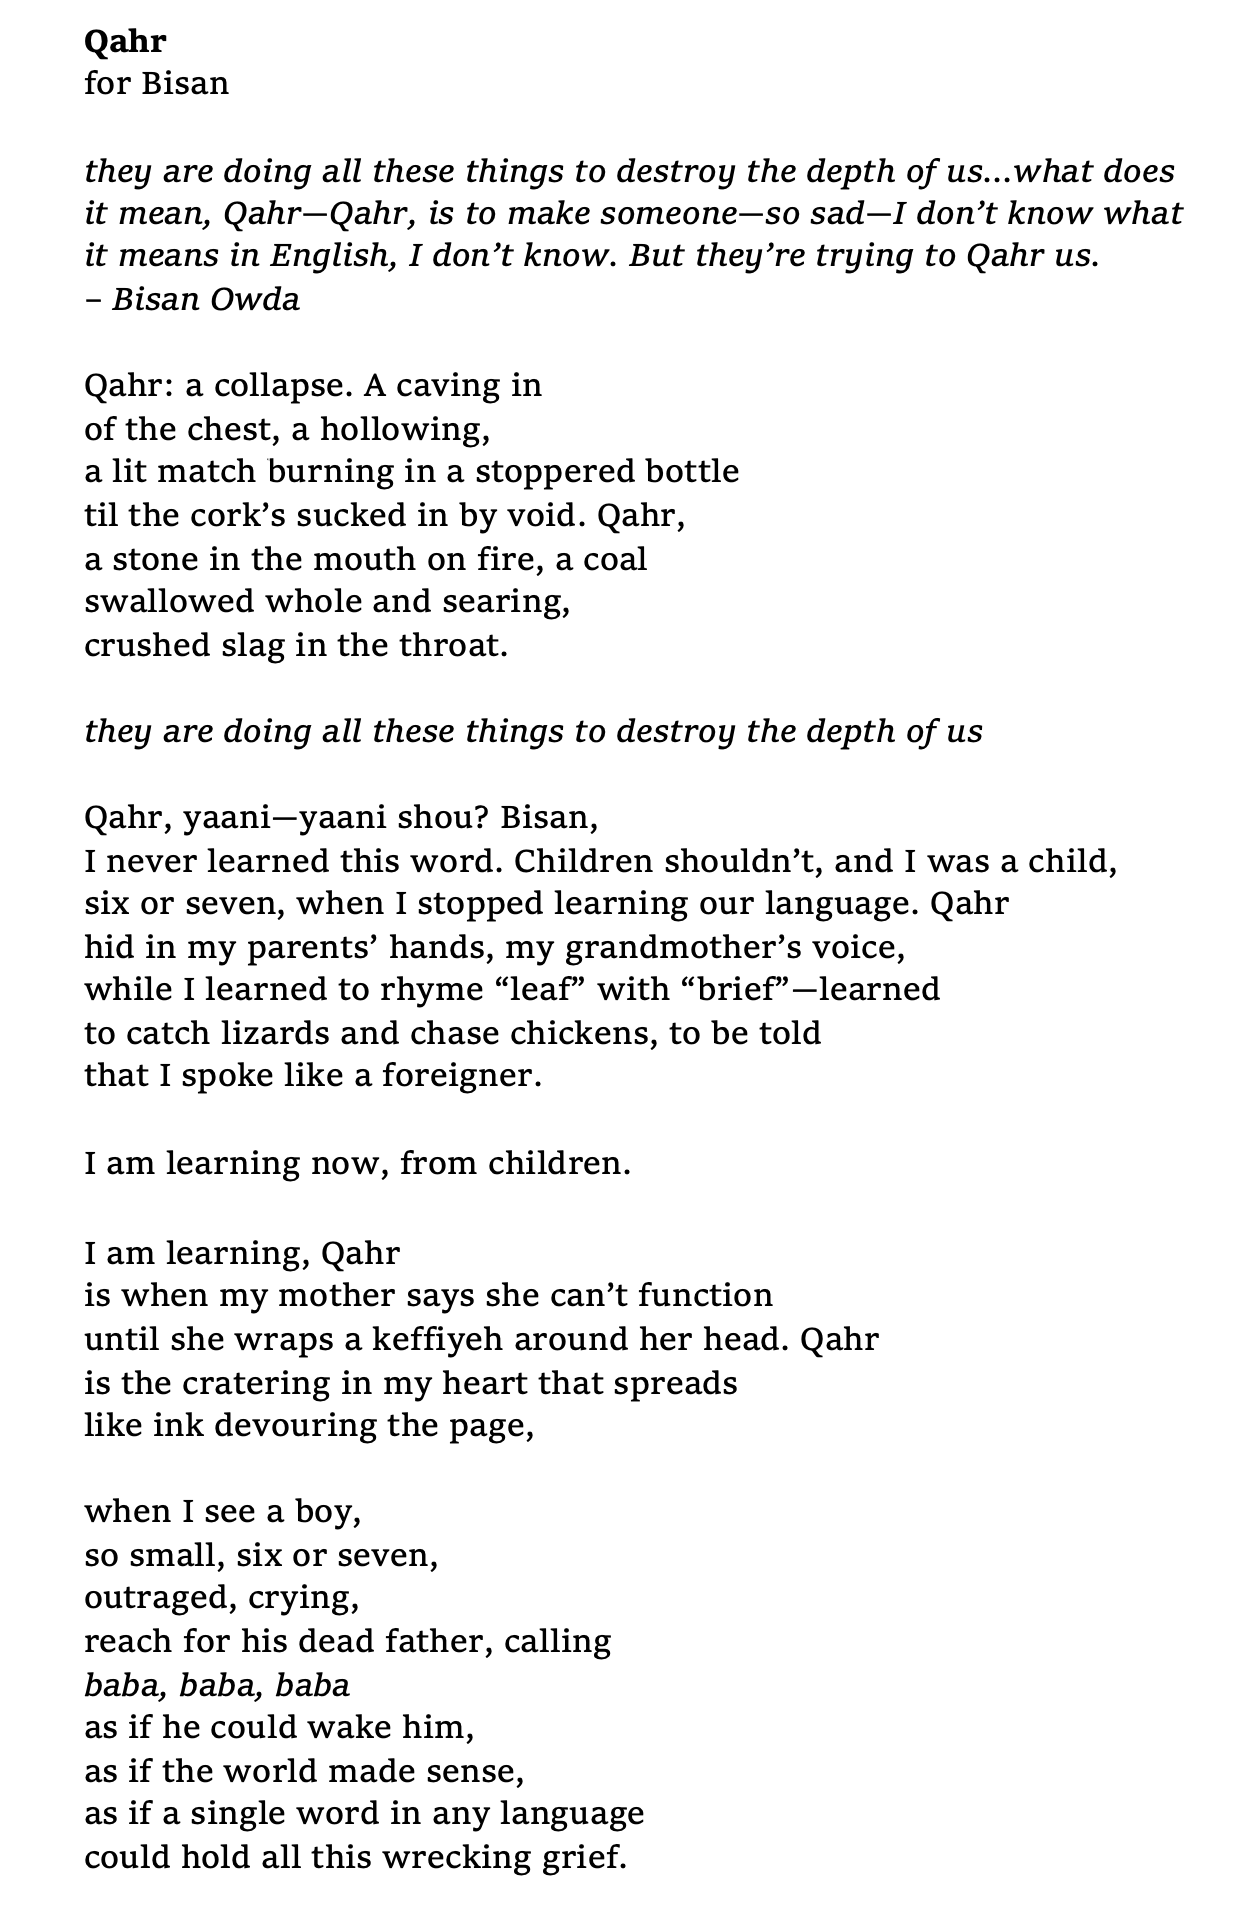 Poem titled "Qahr" opens with an epigraph quoting Bisan Owda, followed by poem text. Text reads as follows: they are doing all these things to destroy the depth of us…what does it mean, Qahr—Qahr, is to make someone—so sad—I don’t know what it means in English, I don’t know. But they’re trying to Qahr us. – Bisan Owda   Qahr: a collapse. A caving in of the chest, a hollowing, a lit match burning in a stoppered bottle til the cork’s sucked in by void. Qahr, a stone in the mouth on fire, a coal swallowed whole and searing, crushed slag in the throat.   they are doing all these things to destroy the depth of us   Qahr, yaani—yaani shou? Bisan, I never learned this word. Children shouldn’t, and I was a child, six or seven, when I stopped learning our language. Qahr hid in my parents’ hands, my grandmother’s voice, while I learned to rhyme “leaf” with “brief”—learned to catch lizards and chase chickens, to be told that I spoke like a foreigner.   I am learning now, from children.   I am learning, Qahr is when my mother says she can’t function until she wraps a keffiyeh around her head. Qahr is the cratering in my heart that spreads like ink devouring the page,   when I see a boy, so small, six or seven,  outraged, crying, reach for his dead father, calling baba, baba, baba as if he could wake him, as if the world made sense, as if a single word in any language could hold all this wrecking grief.